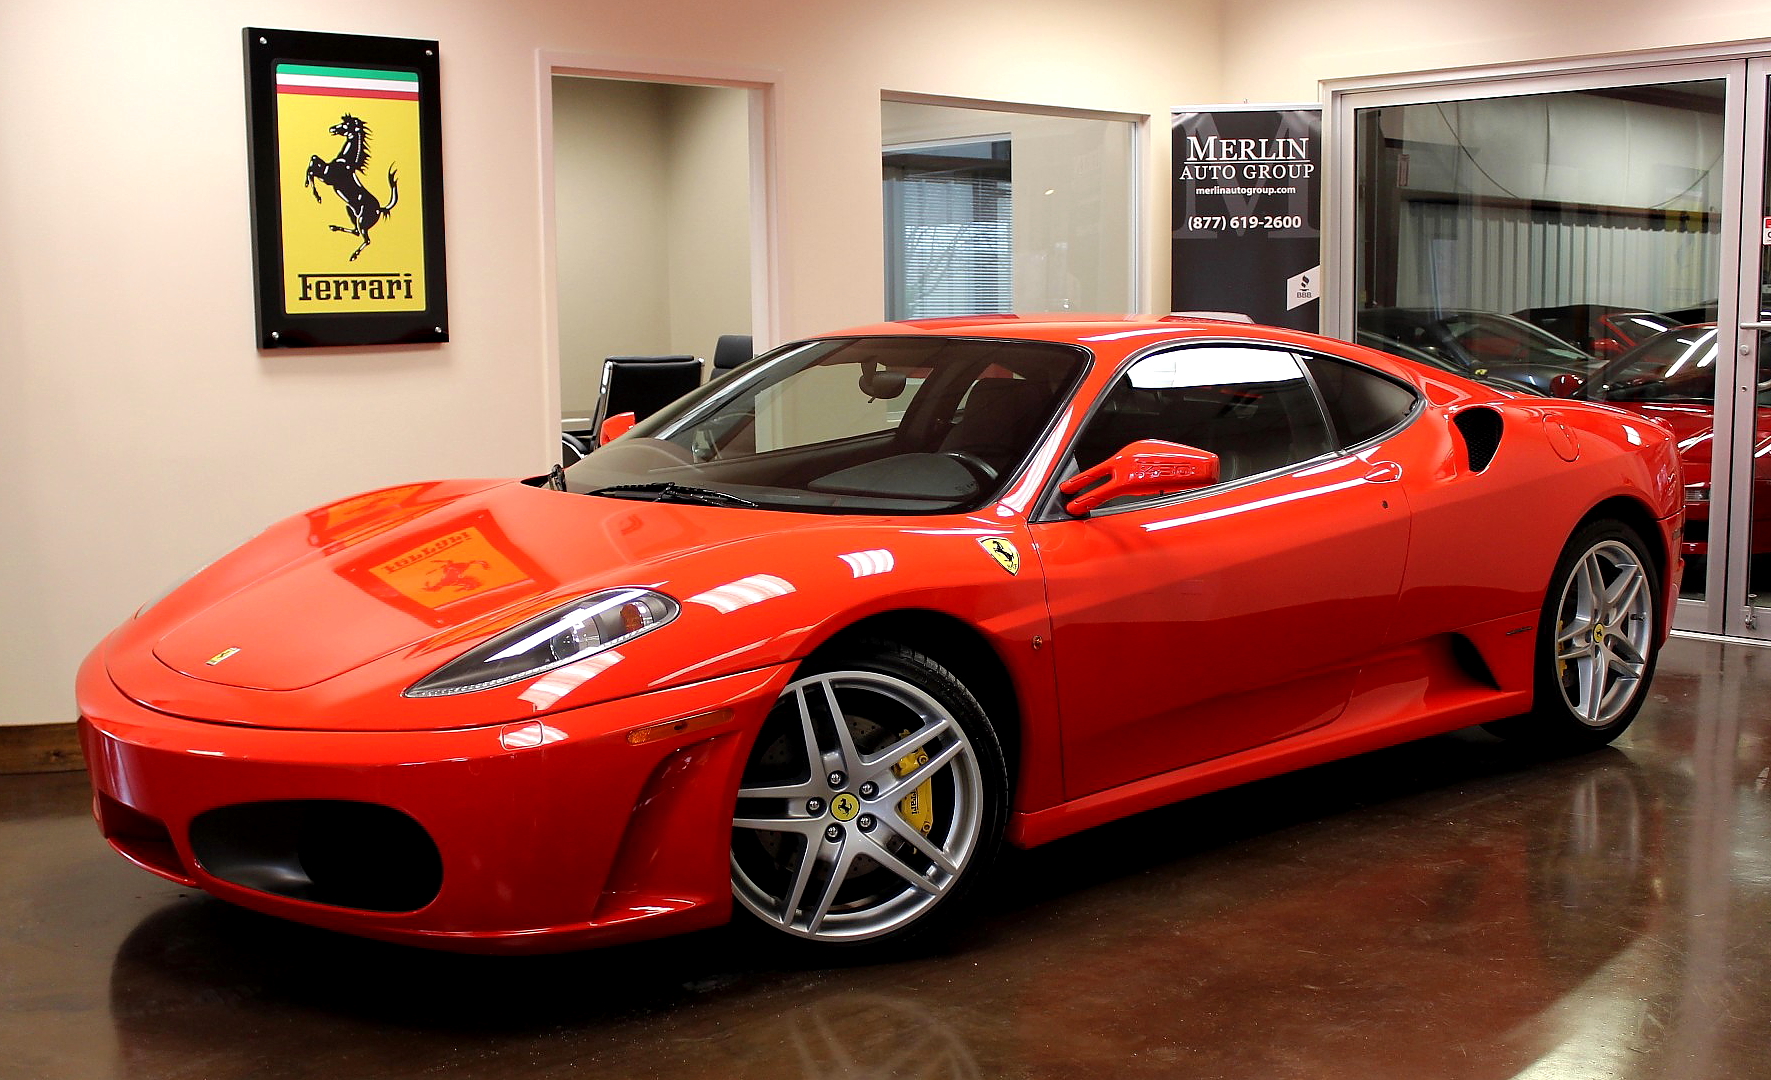 What Changed from the 360 to the F430? | Merlin Auto Group